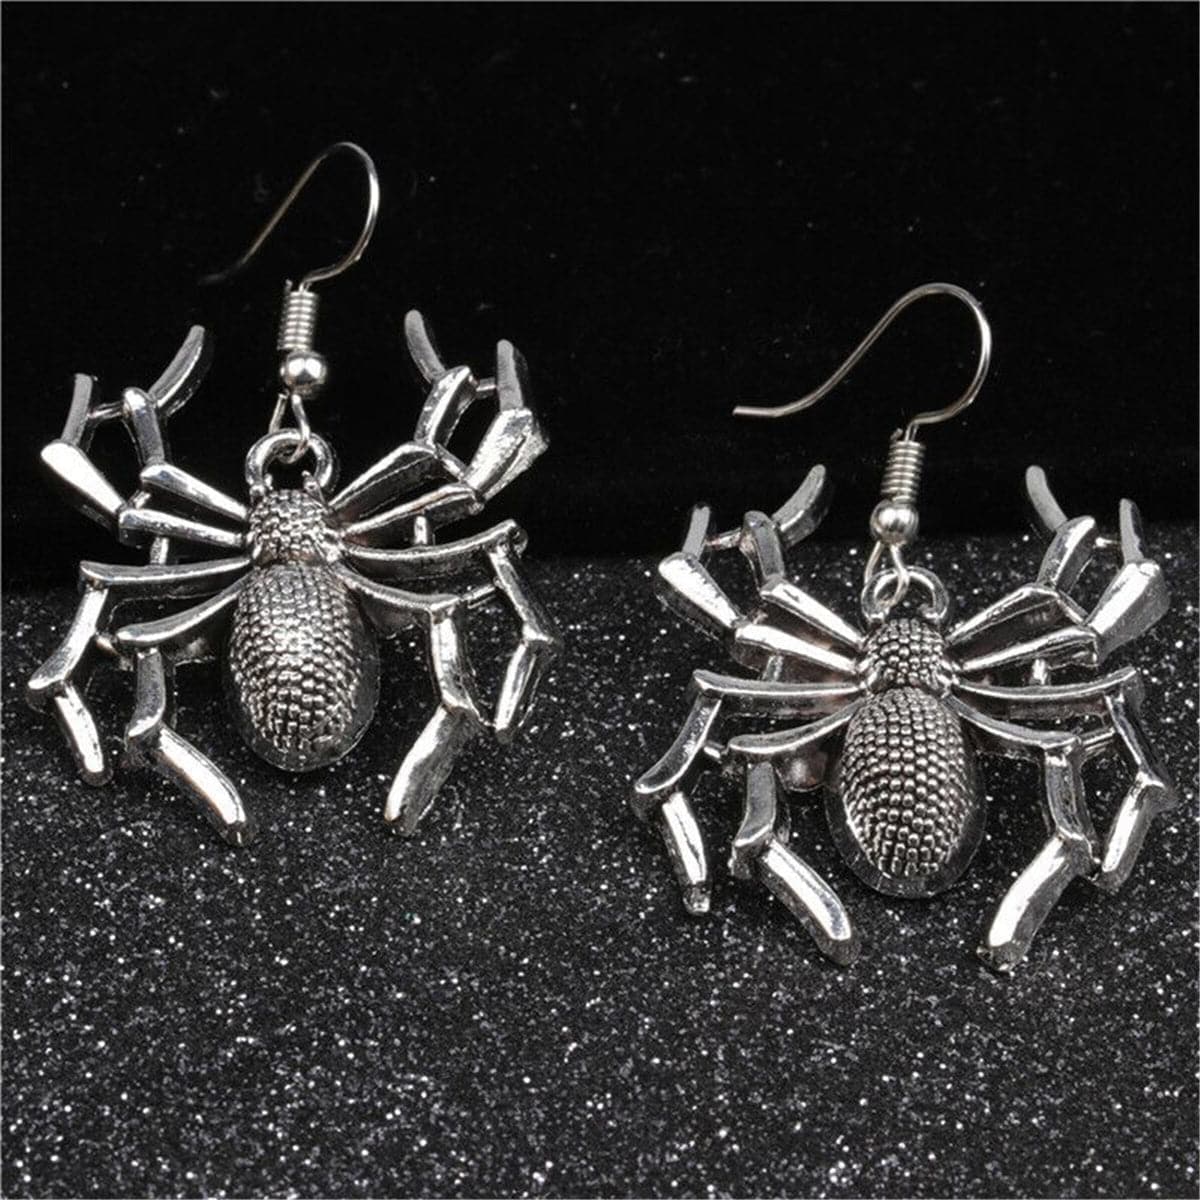 Silver-Plated Spider Drop Earrings